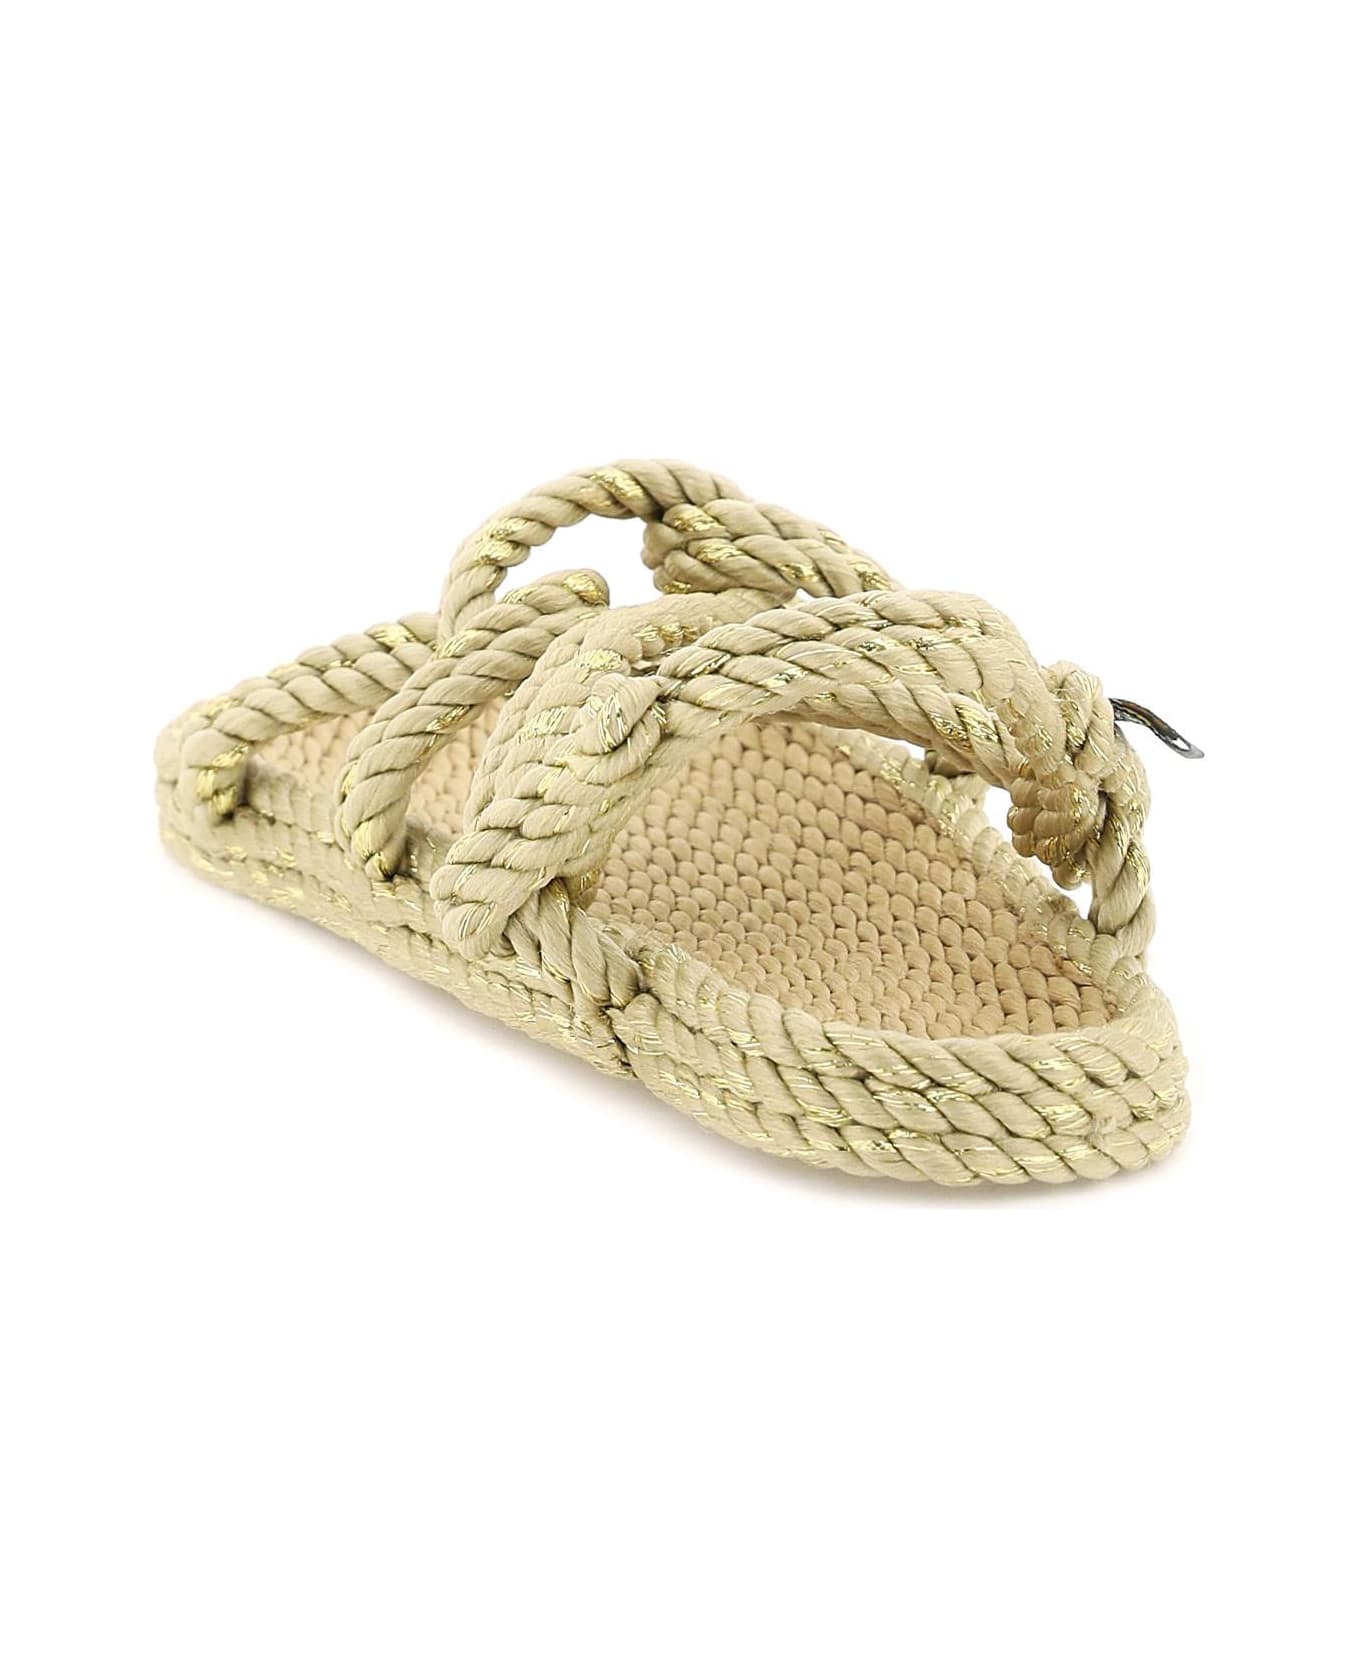 Nomadic State of Mind Mountain Momma S Rope Sandals - BEIGE SPARKLING GOLD (Beige)